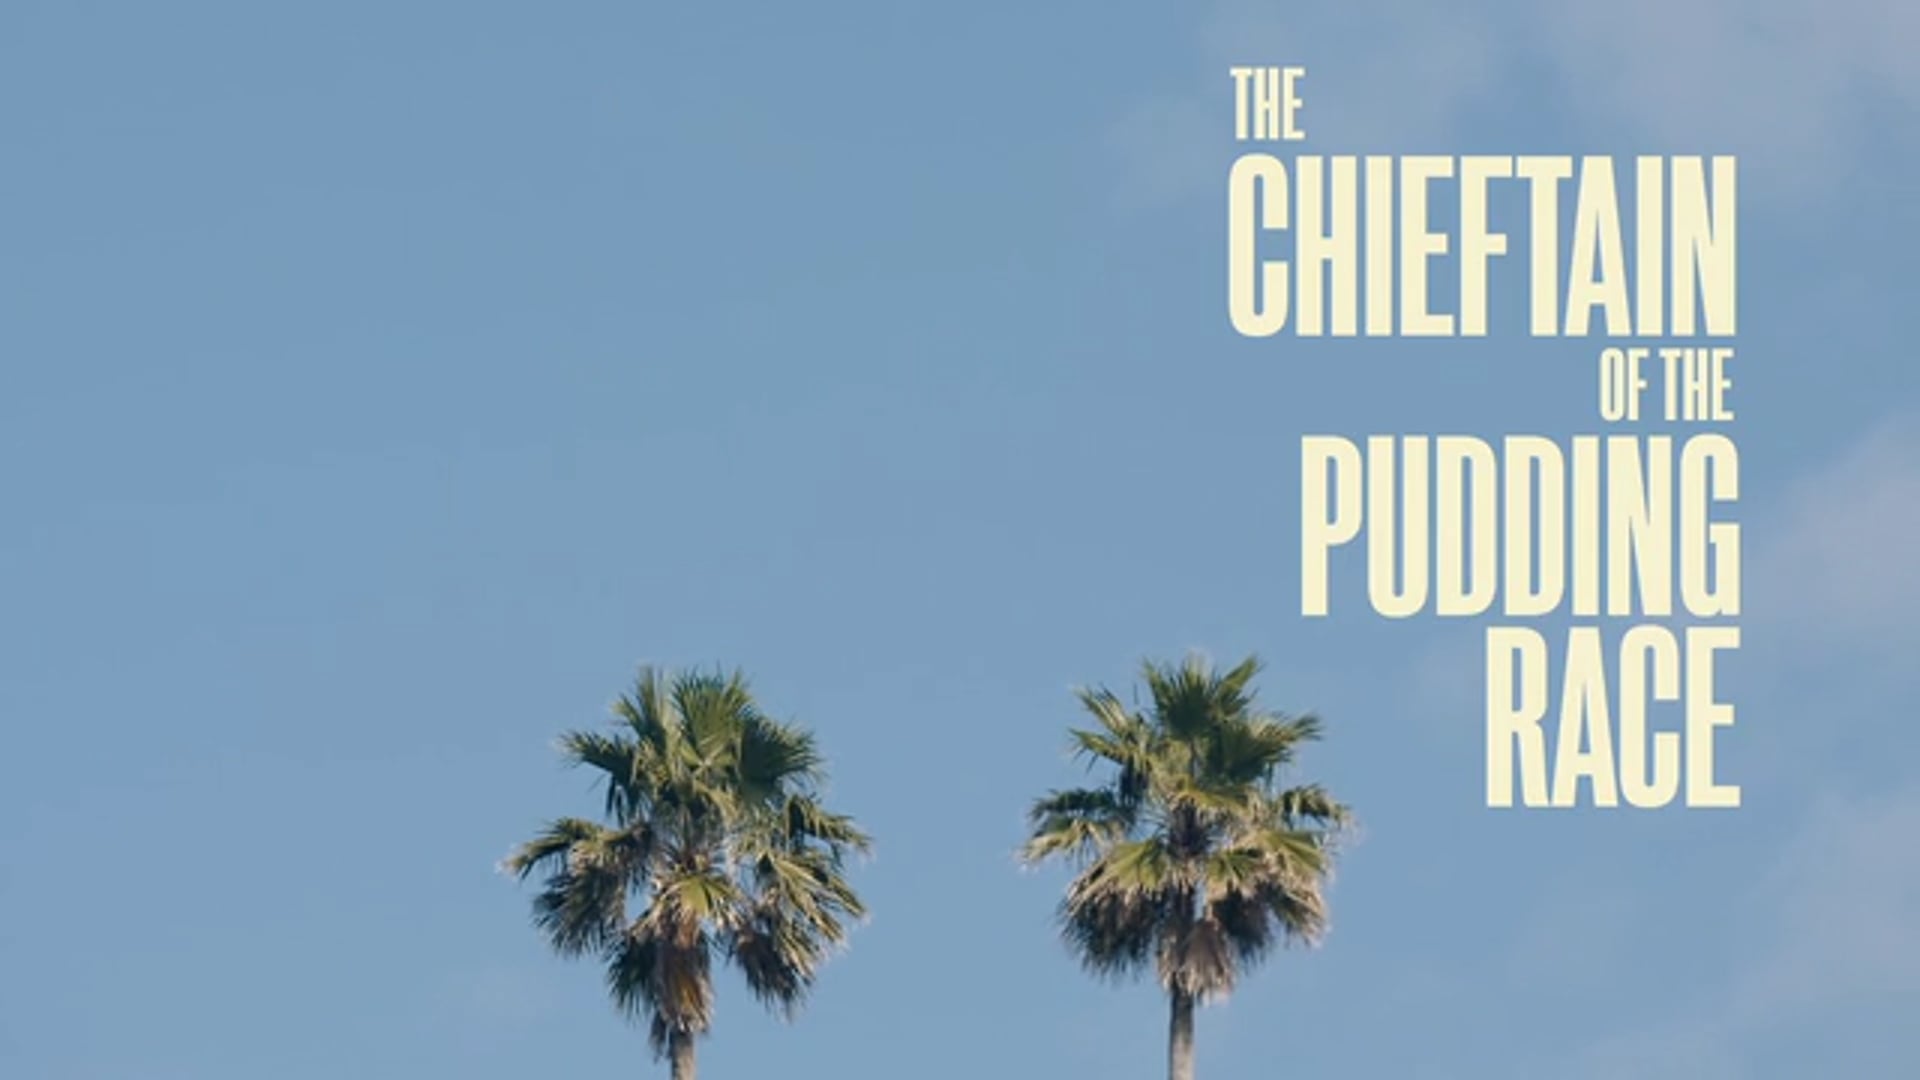 The Chieftain Of The Pudding Race | Promo Teaser